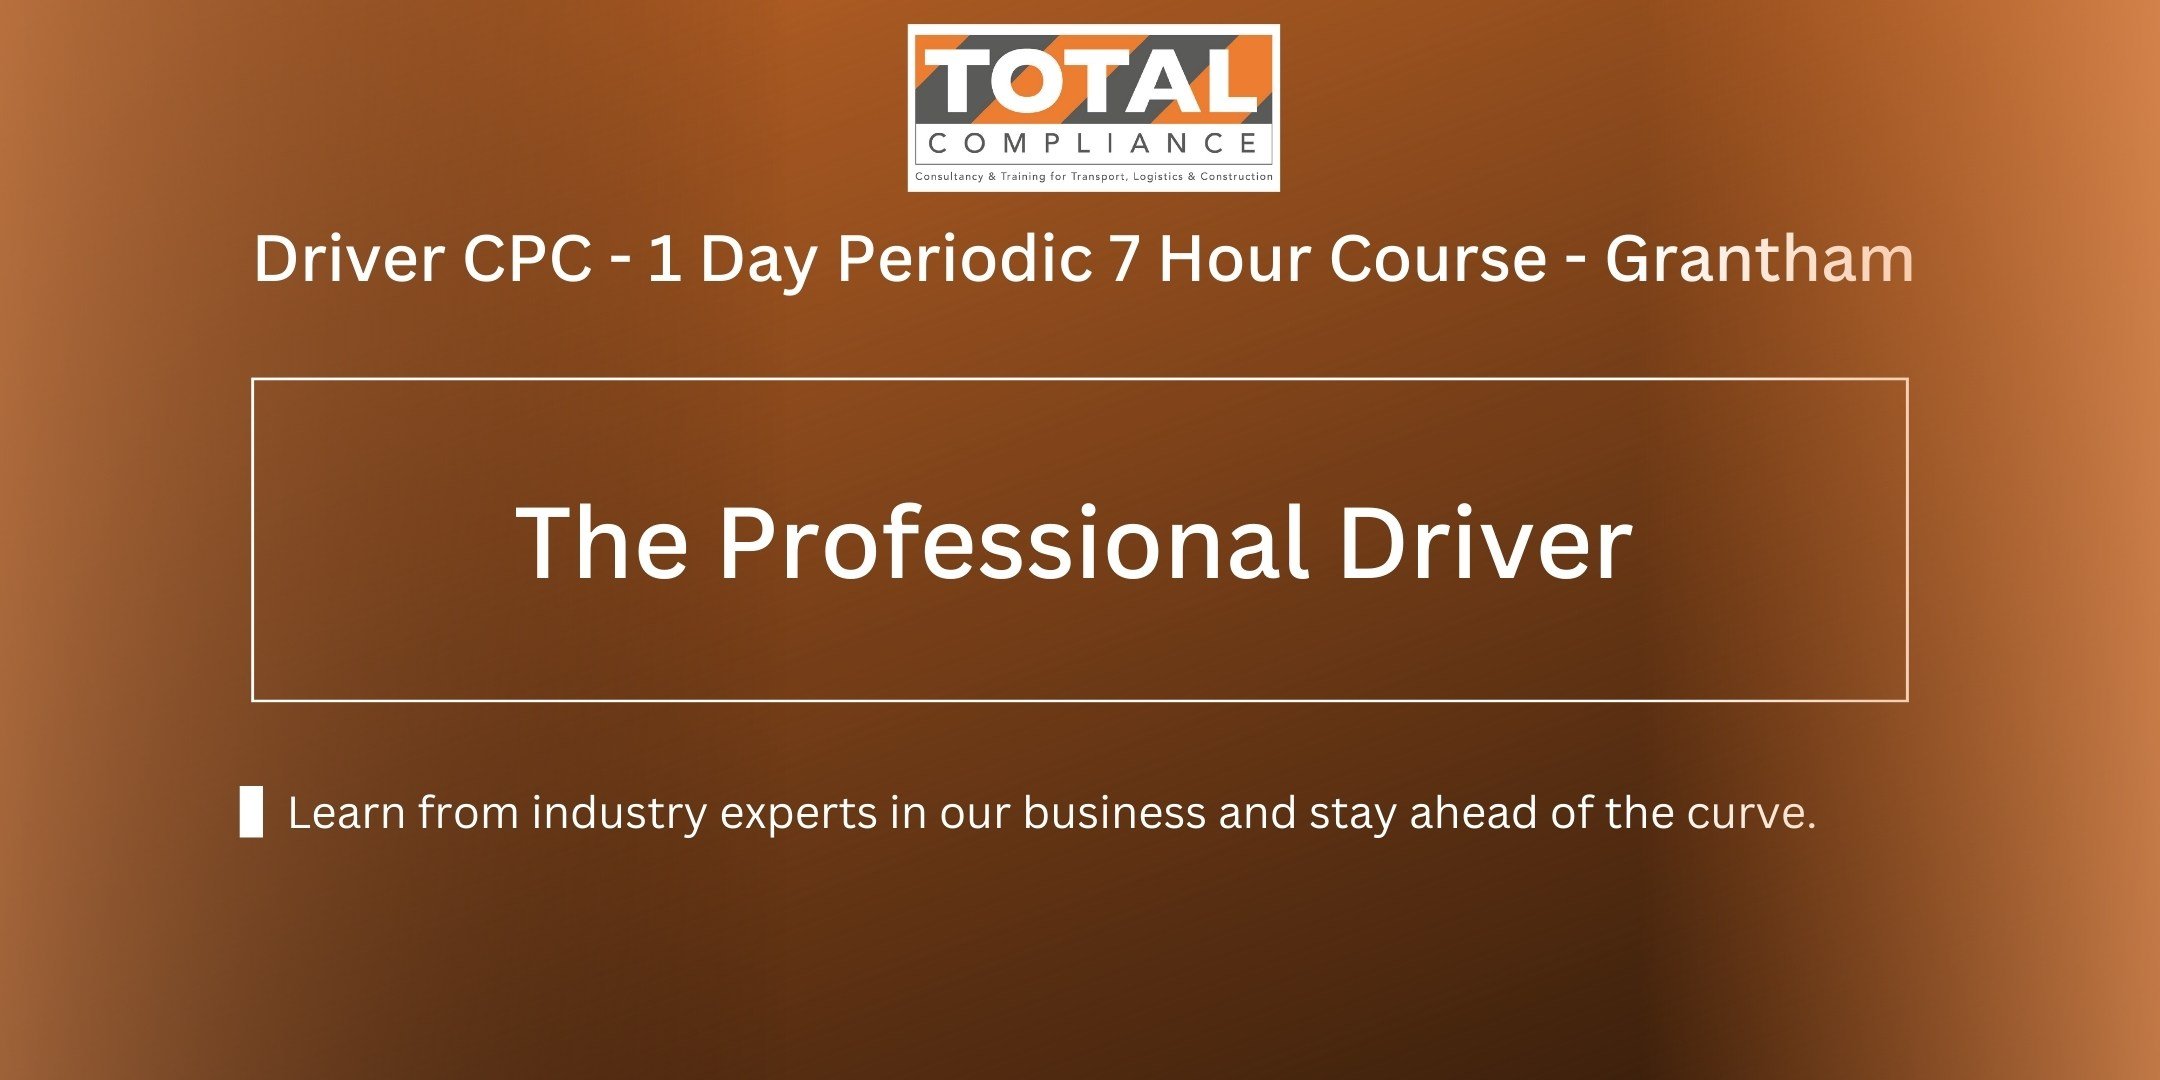 Driver CPC - 1 Day Periodic 7 Hour Course/The Professional Driver - Wakefield